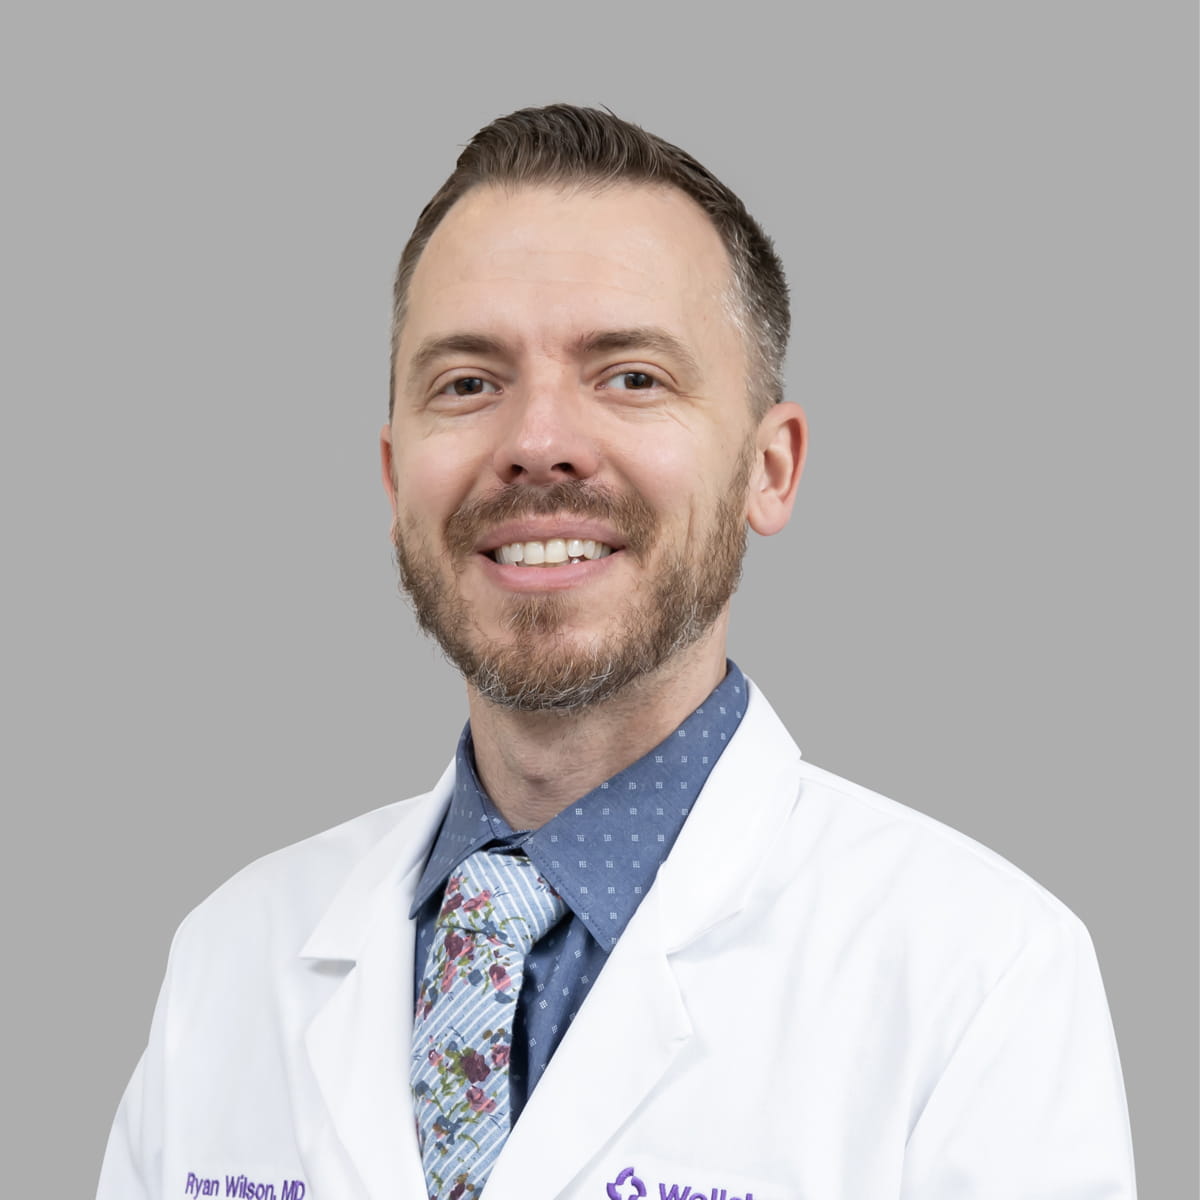 A friendly image of Ryan Wilson MD